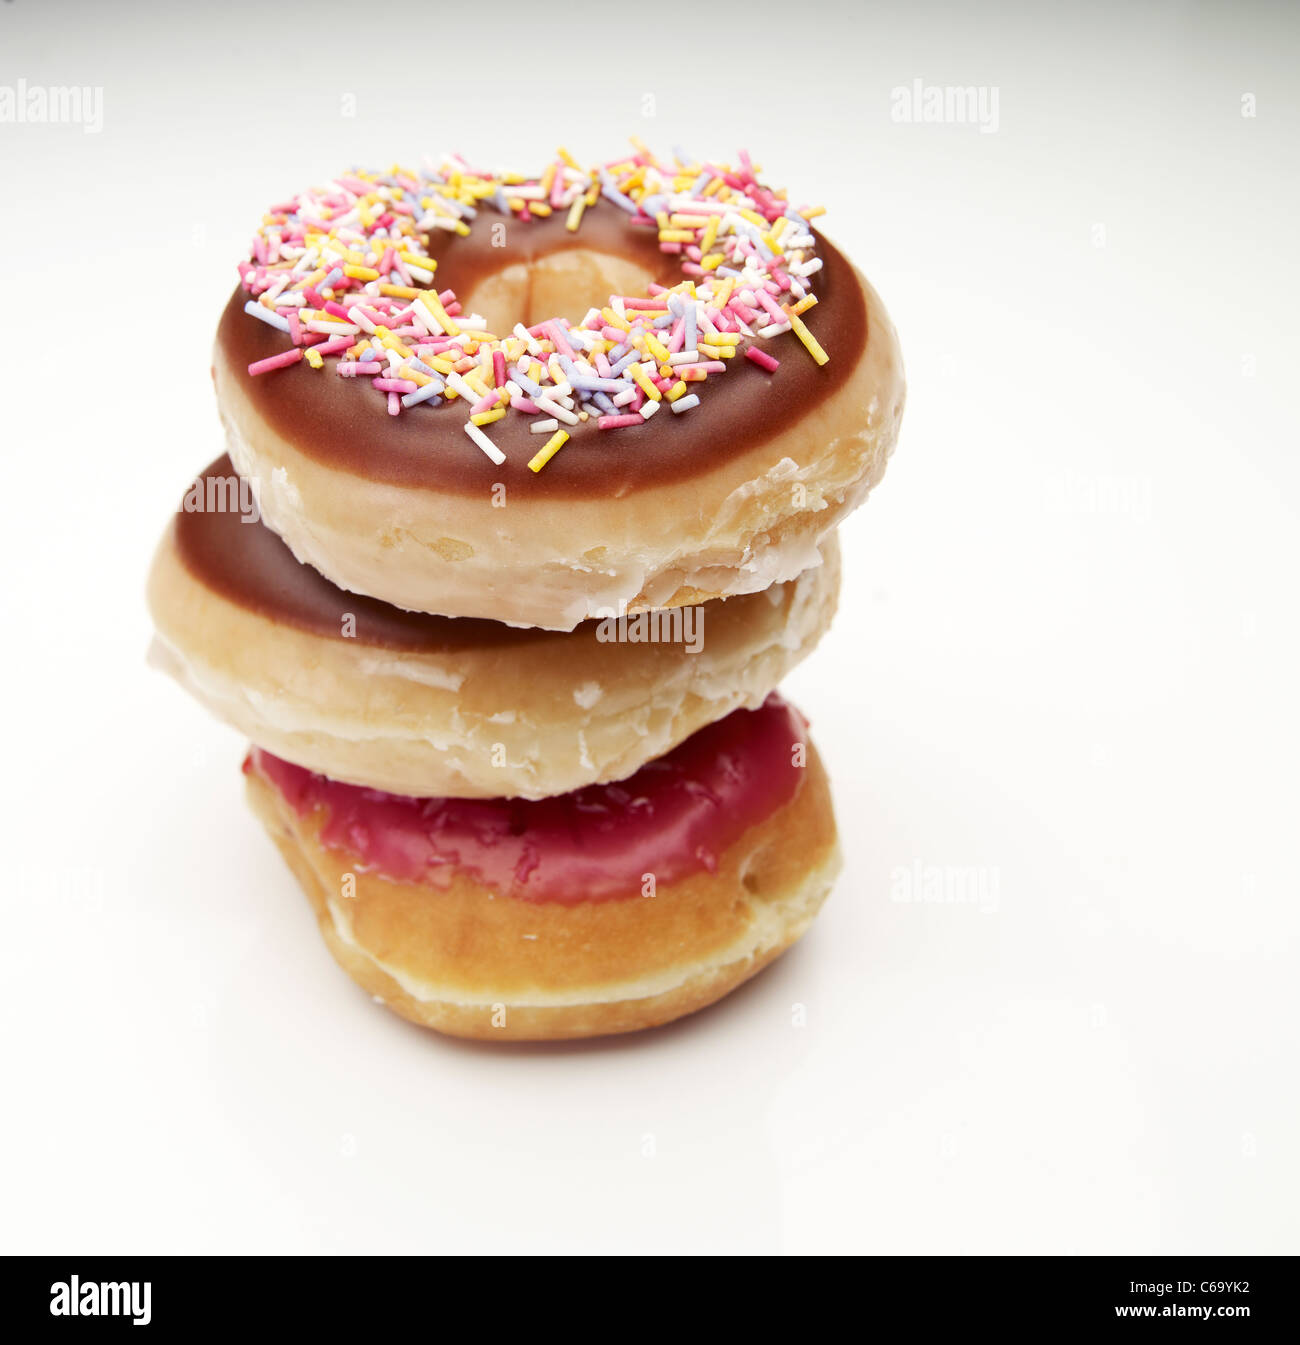 A stack of three doughnuts on a white background Stock Photo